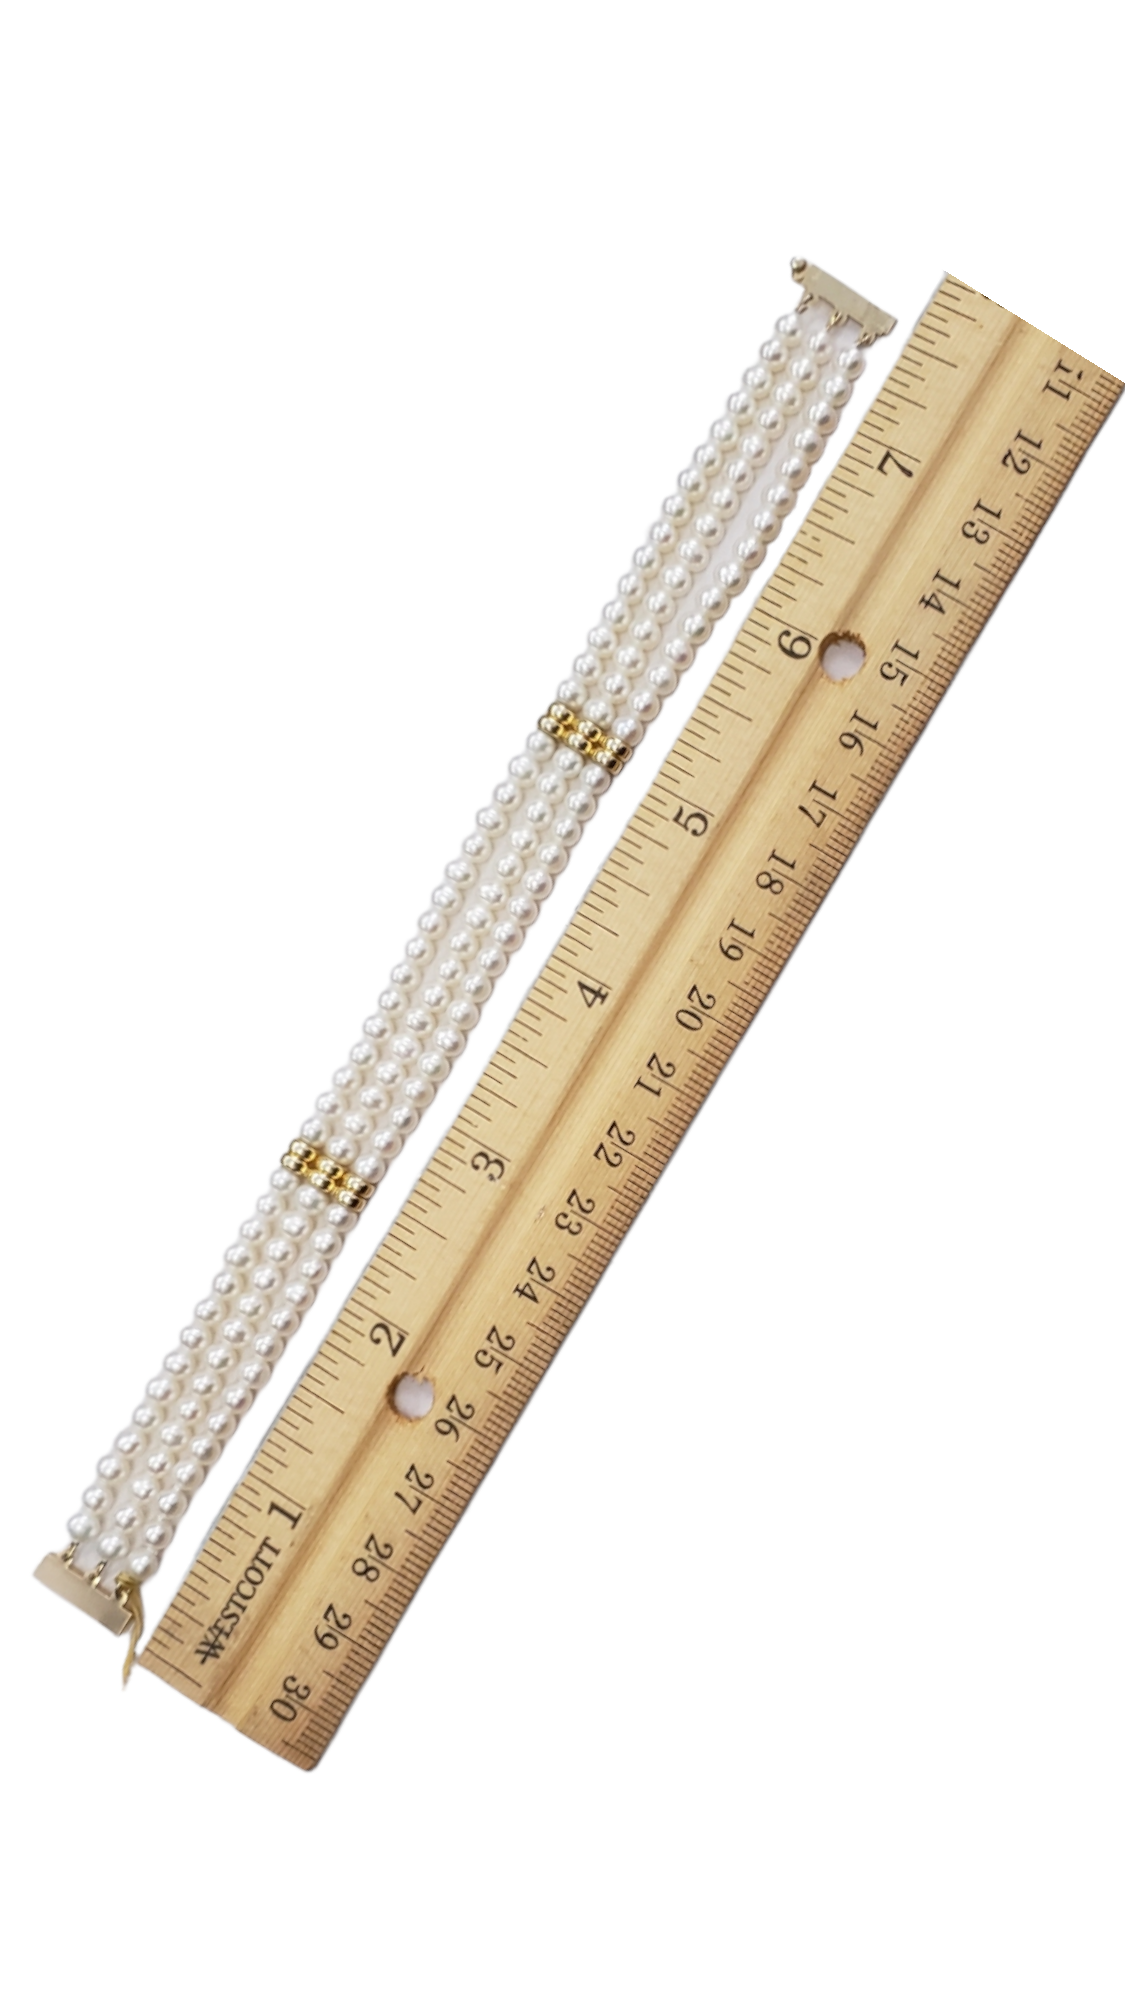 Cultured Triple Strand Pearl Bracelet with 14k Yellow Gold Slide Box clasp